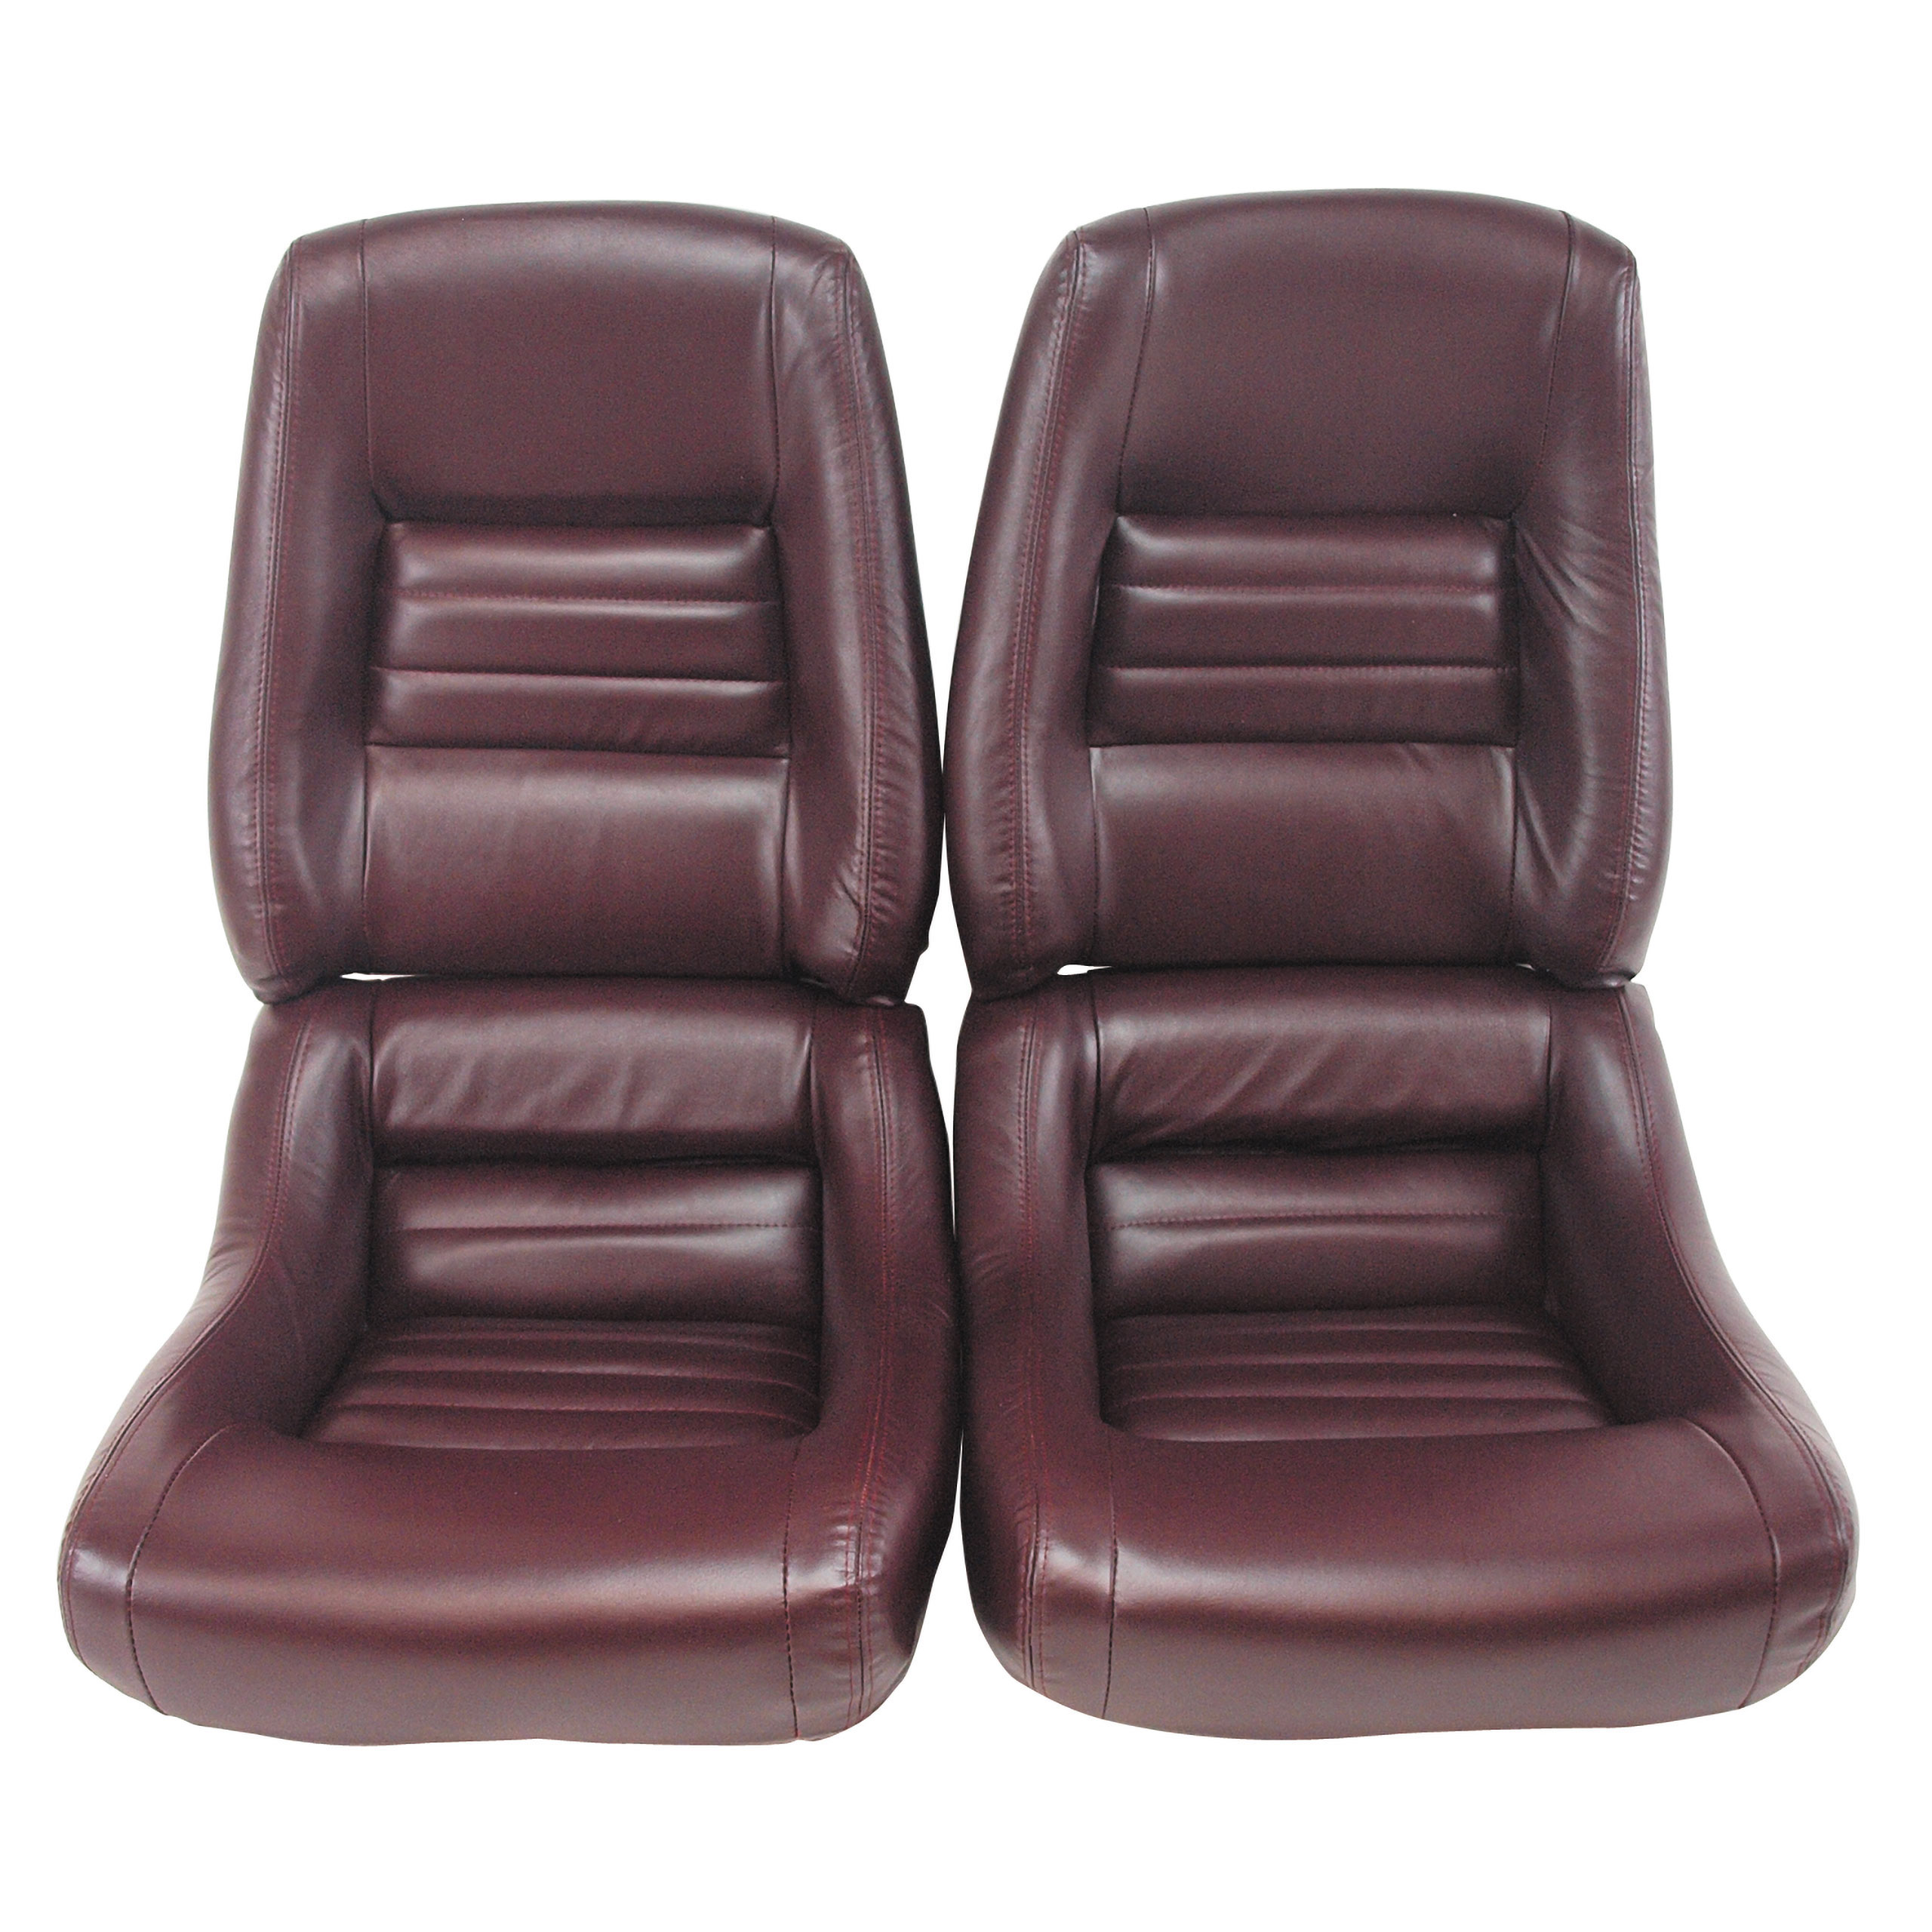 1980 Corvette C3 Leather Seat Covers Claret 100%-Leather 4" Bolster CA-420236 